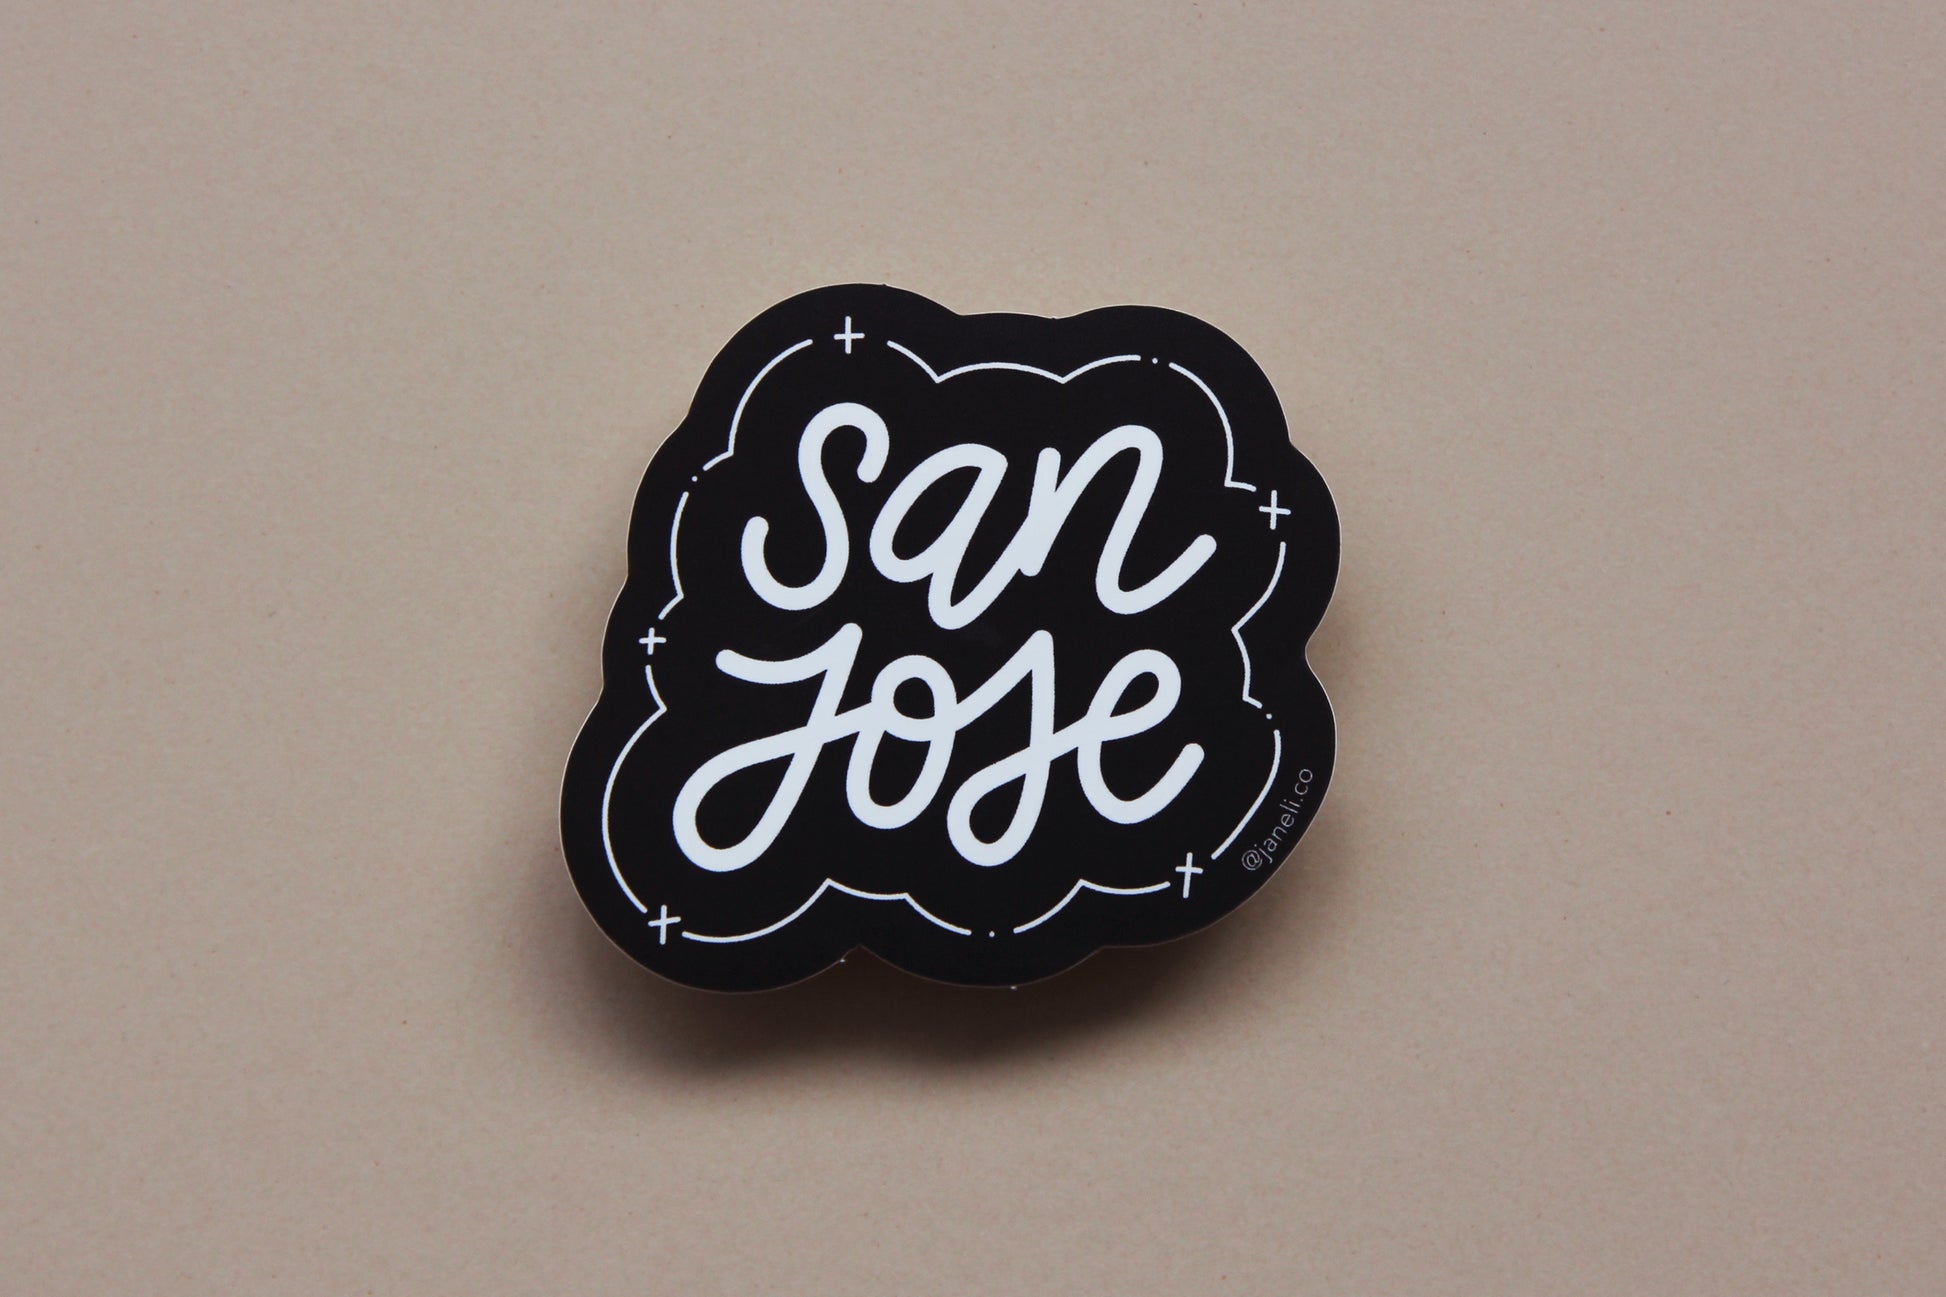 A black and white JaneLi.Co sticker that says "San Jose" in cursive lettering over a tan background. 